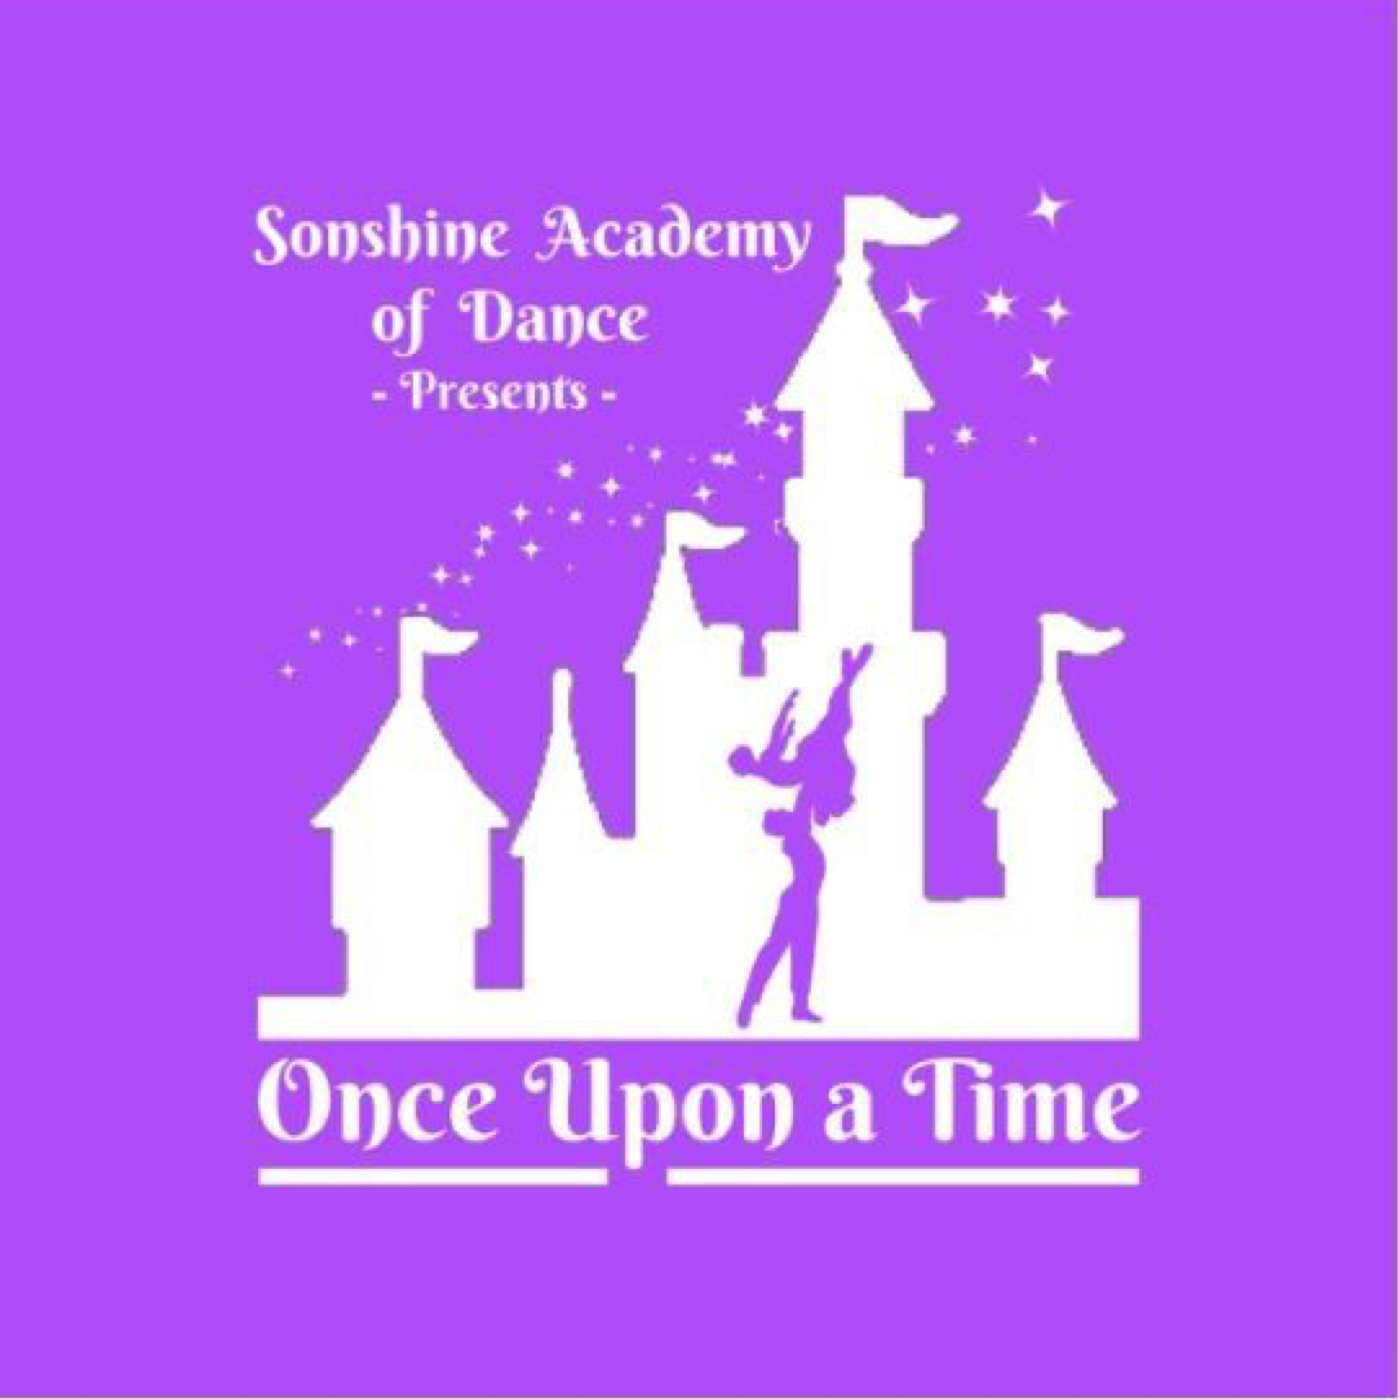 2017 "Once Upon a Time"